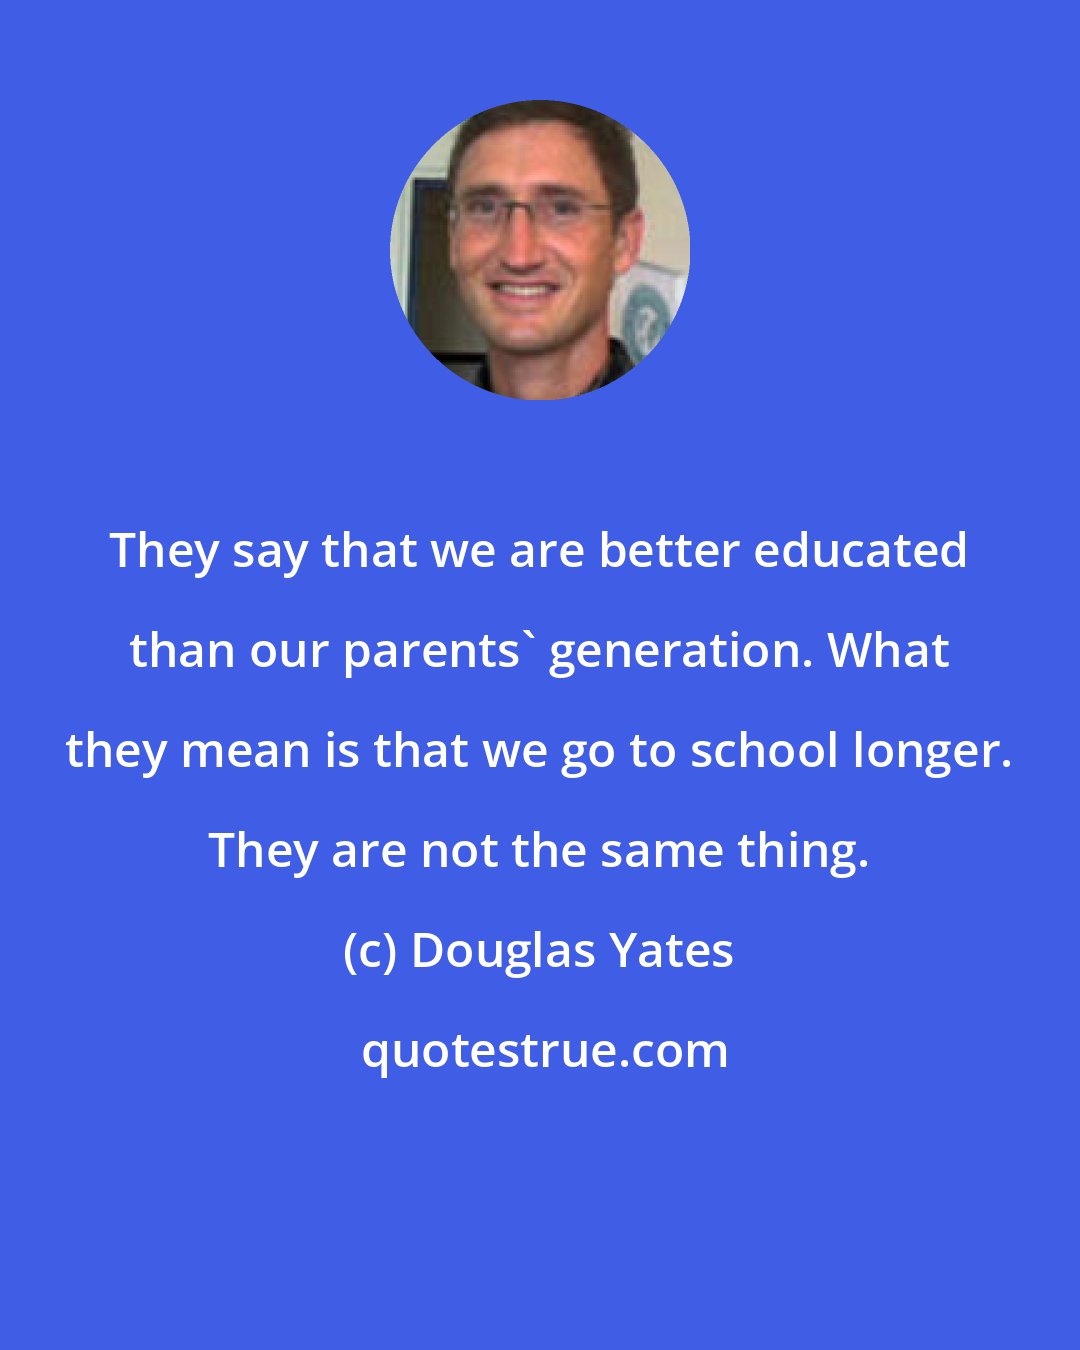 Douglas Yates: They say that we are better educated than our parents' generation. What they mean is that we go to school longer. They are not the same thing.